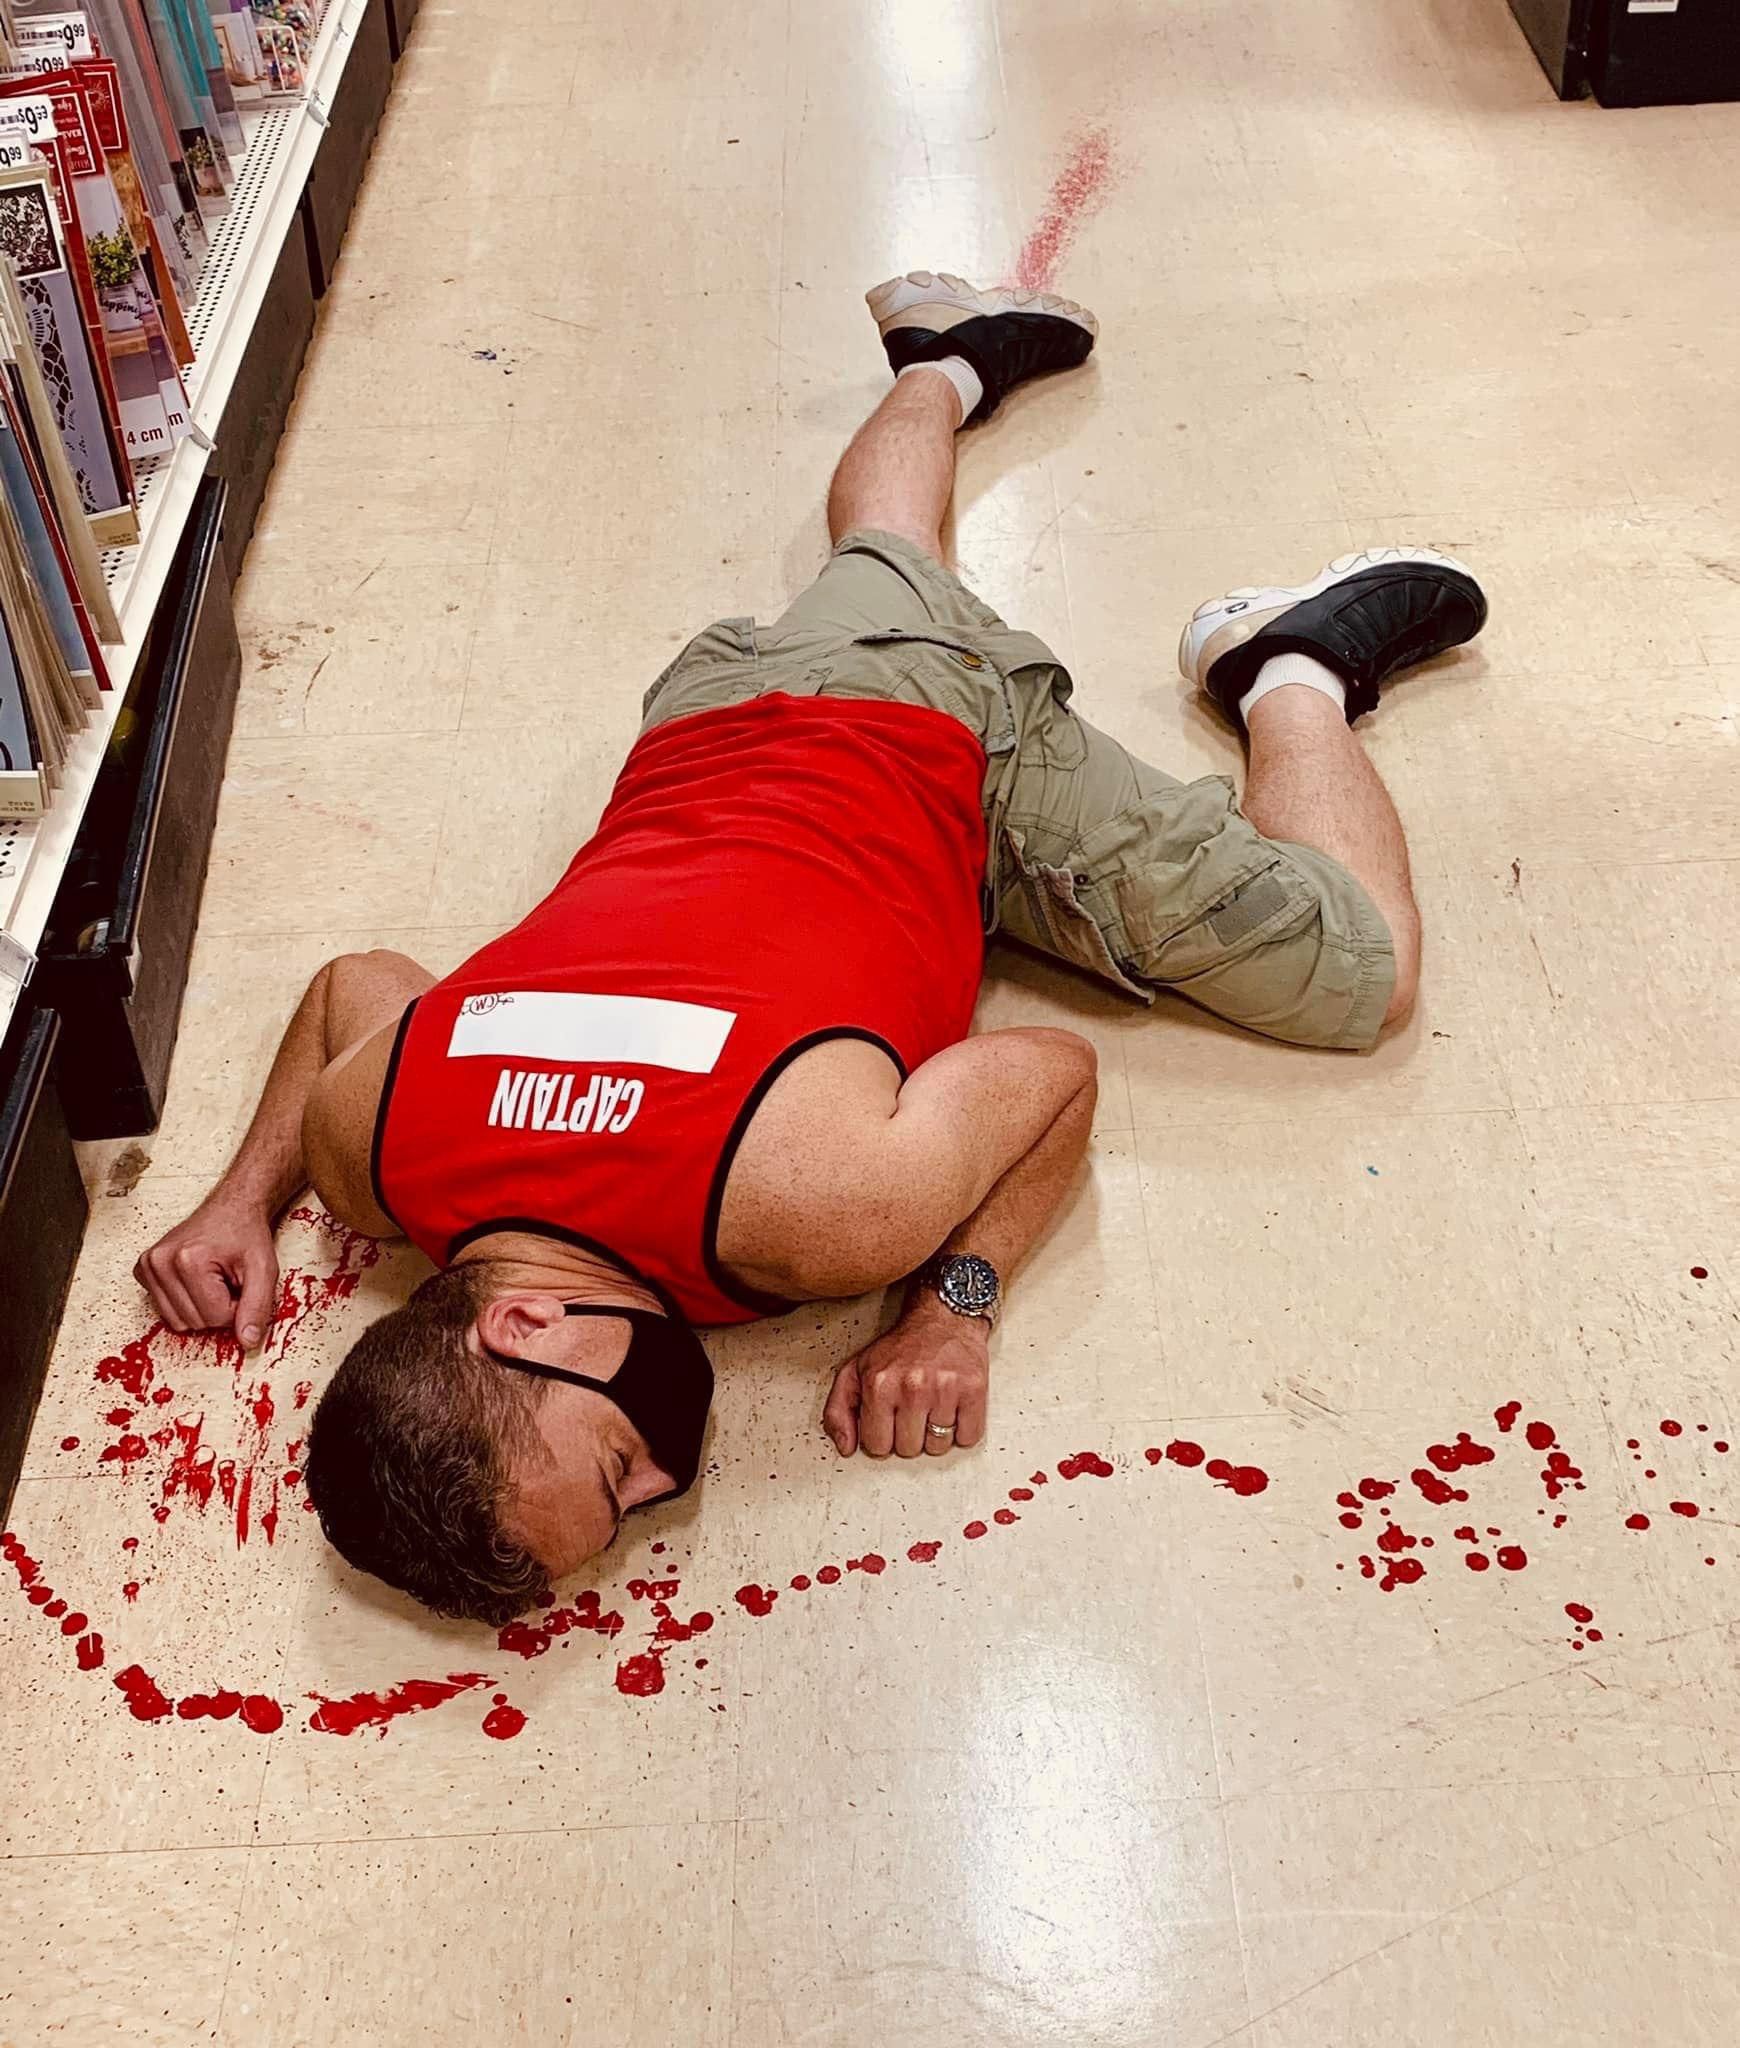 Took advantage of a stain on the floor at a hobby store and scared some folks. Bad taste joke… prolly, but whatever it was fun. lol